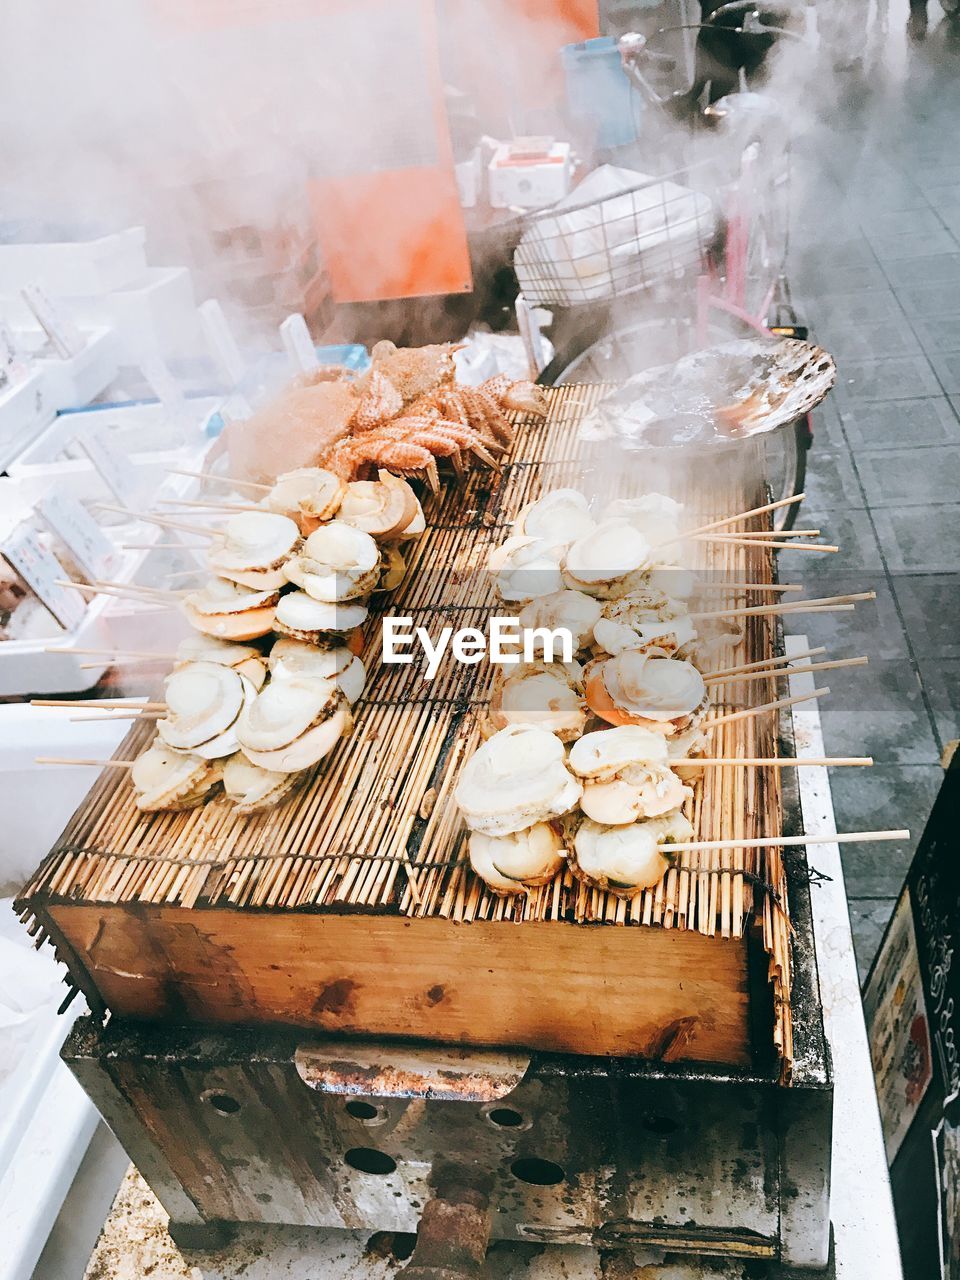 CLOSE-UP OF MEAT ON BARBECUE GRILL